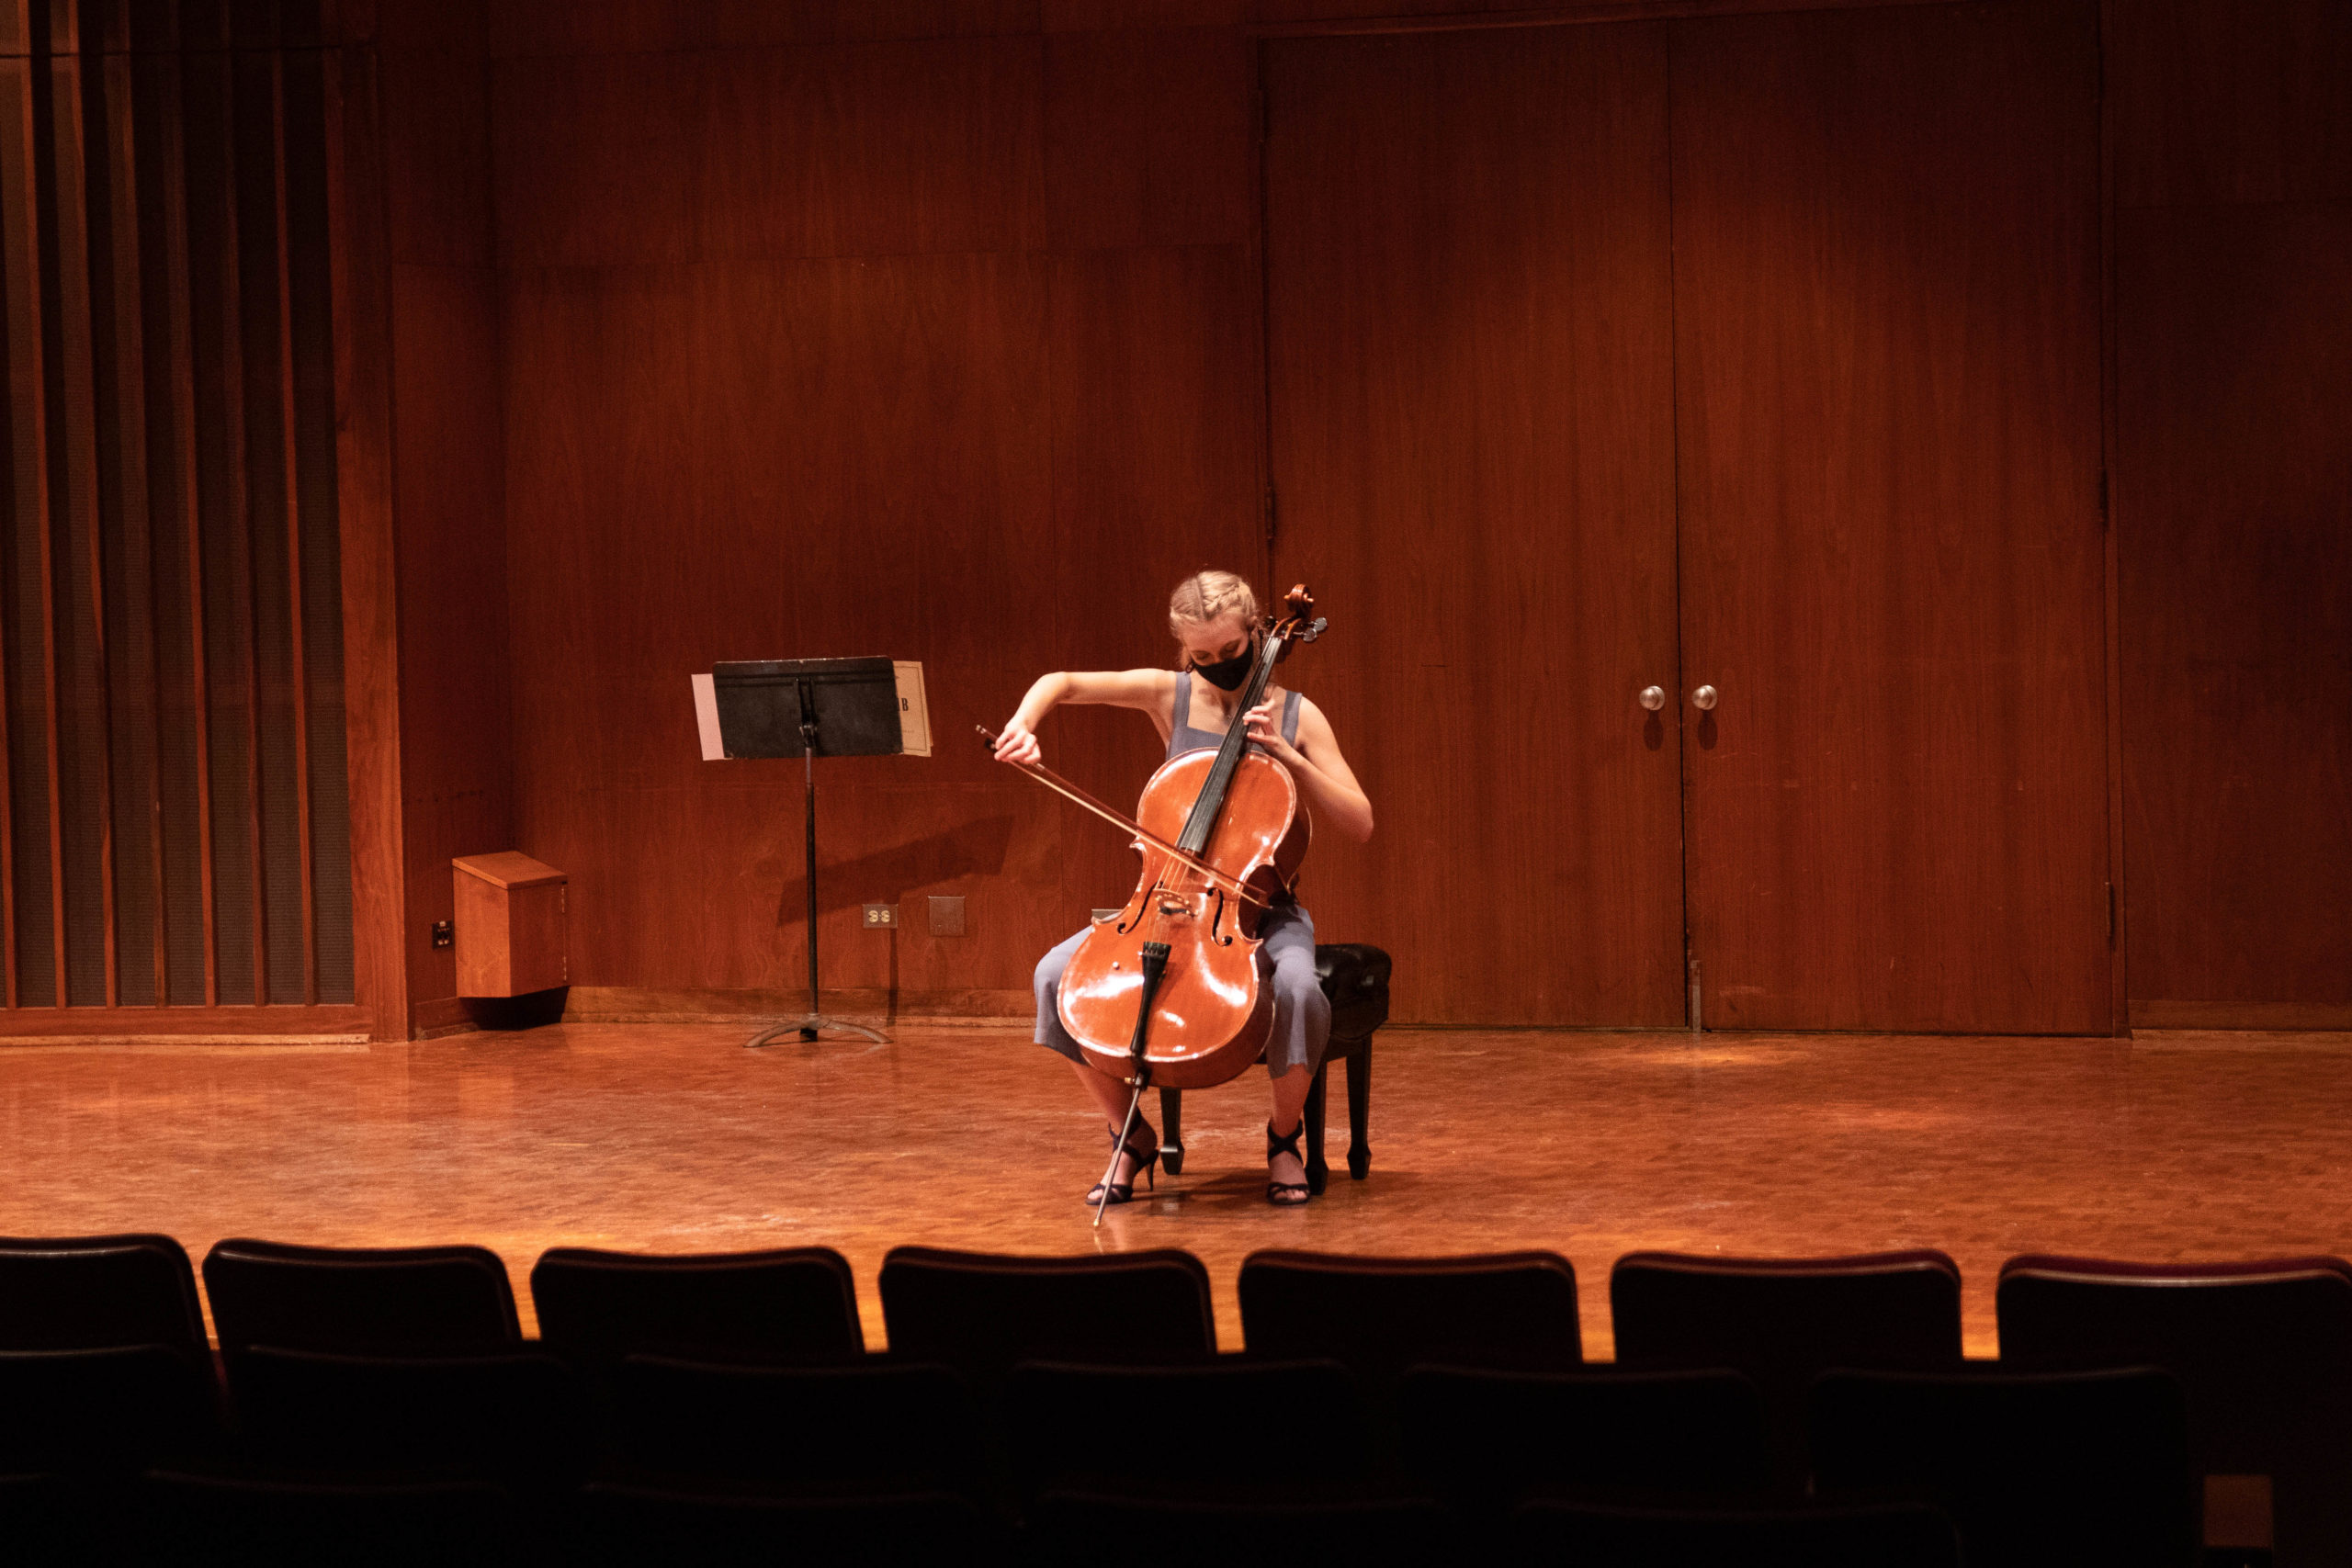 Masked young white person plays cello alone on stage.